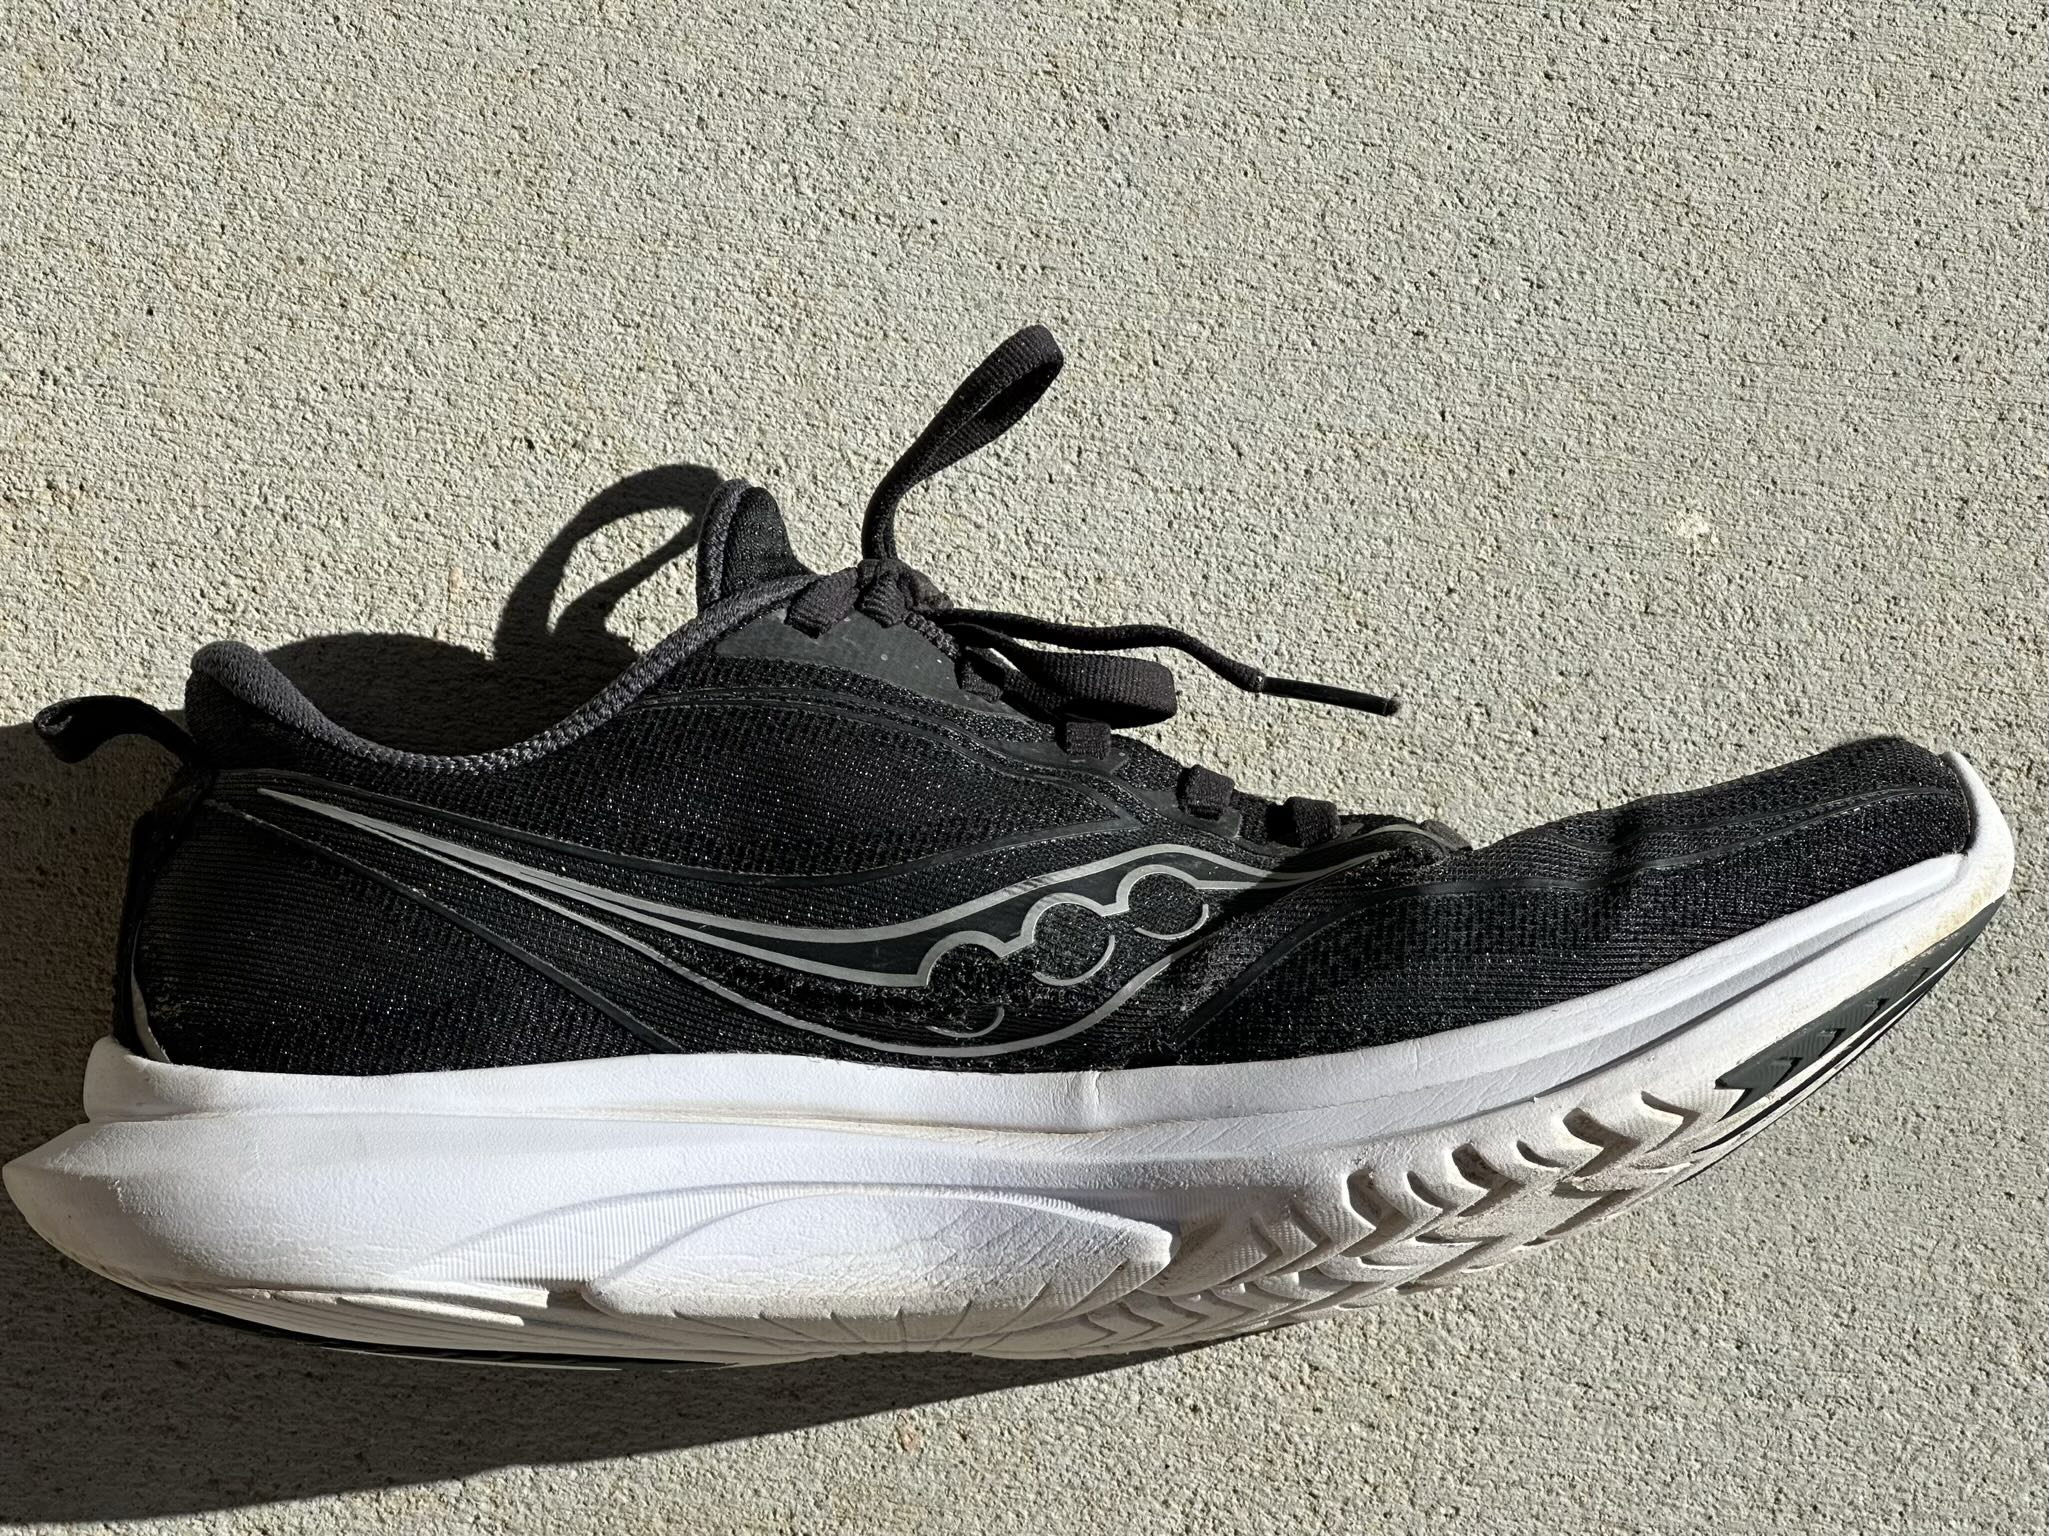 A black Saucony Kinvara 13 shoe after 660 miles. It's hard to see in this photo, but there is a lengthy stress tear in the uppers along the base of the Saucony logo. They only happen on the inner side of the foot.